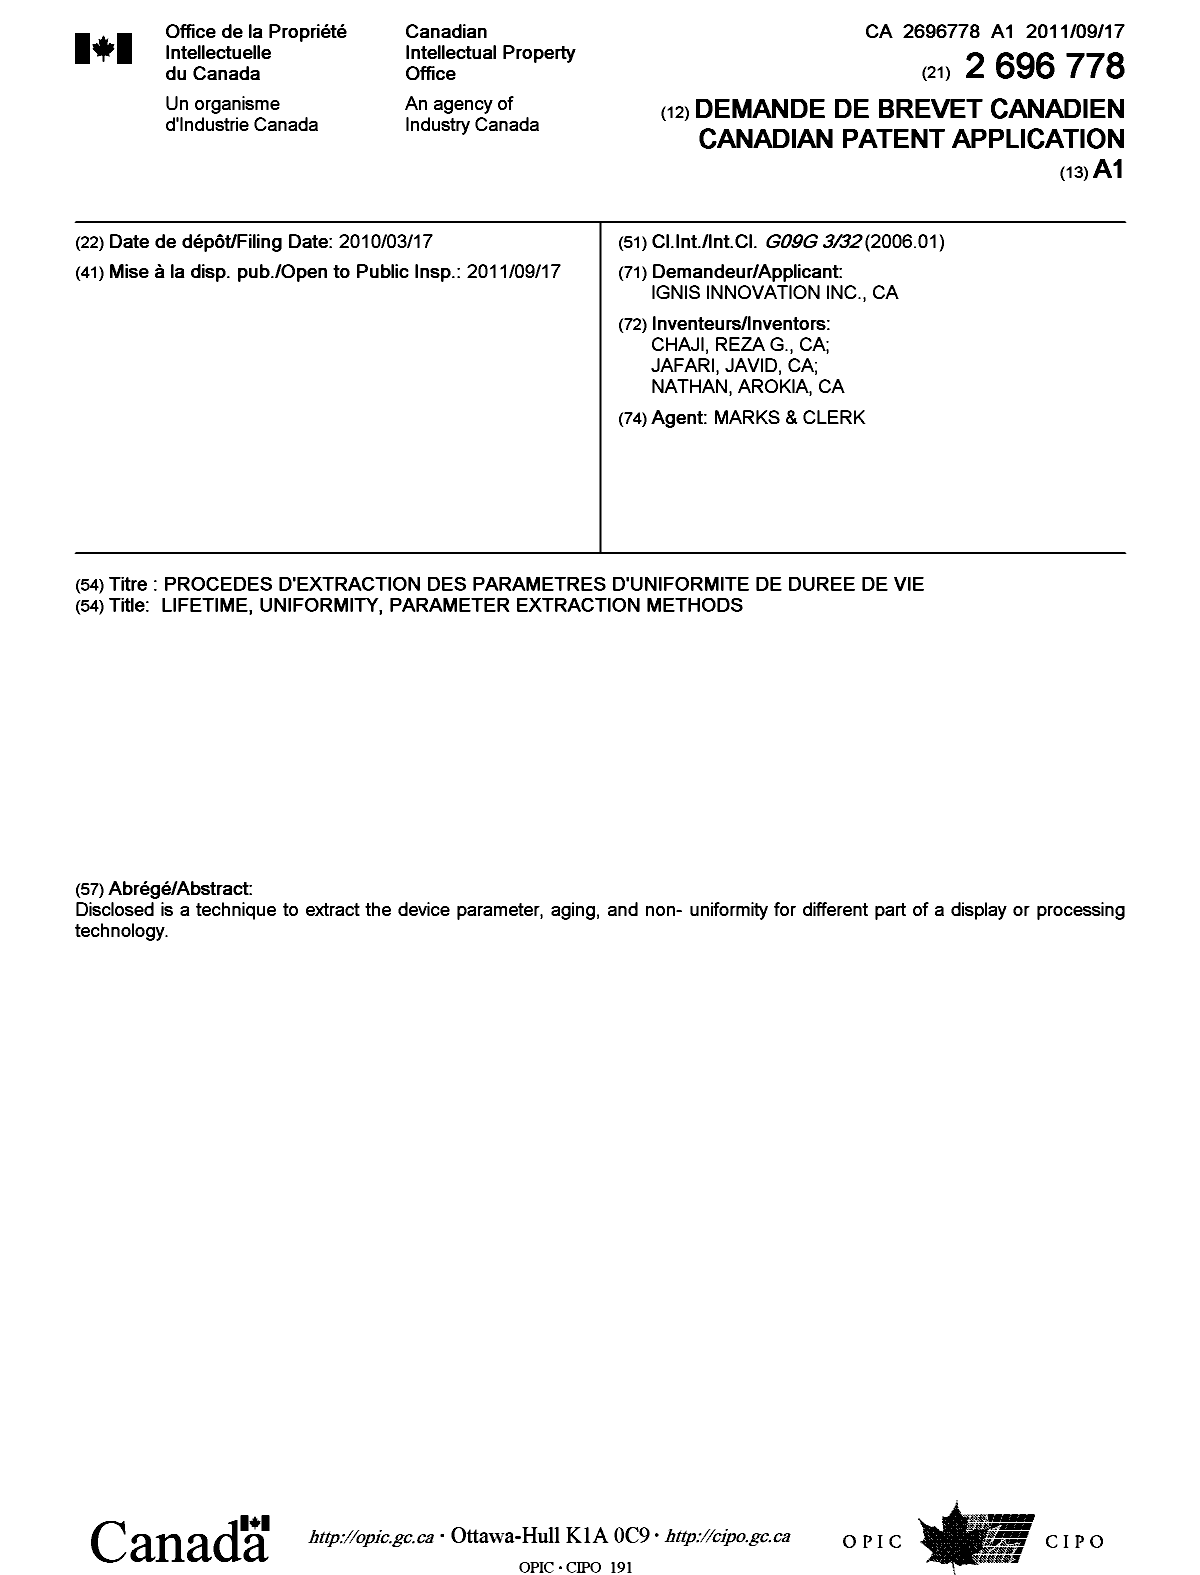 Canadian Patent Document 2696778. Cover Page 20110825. Image 1 of 1